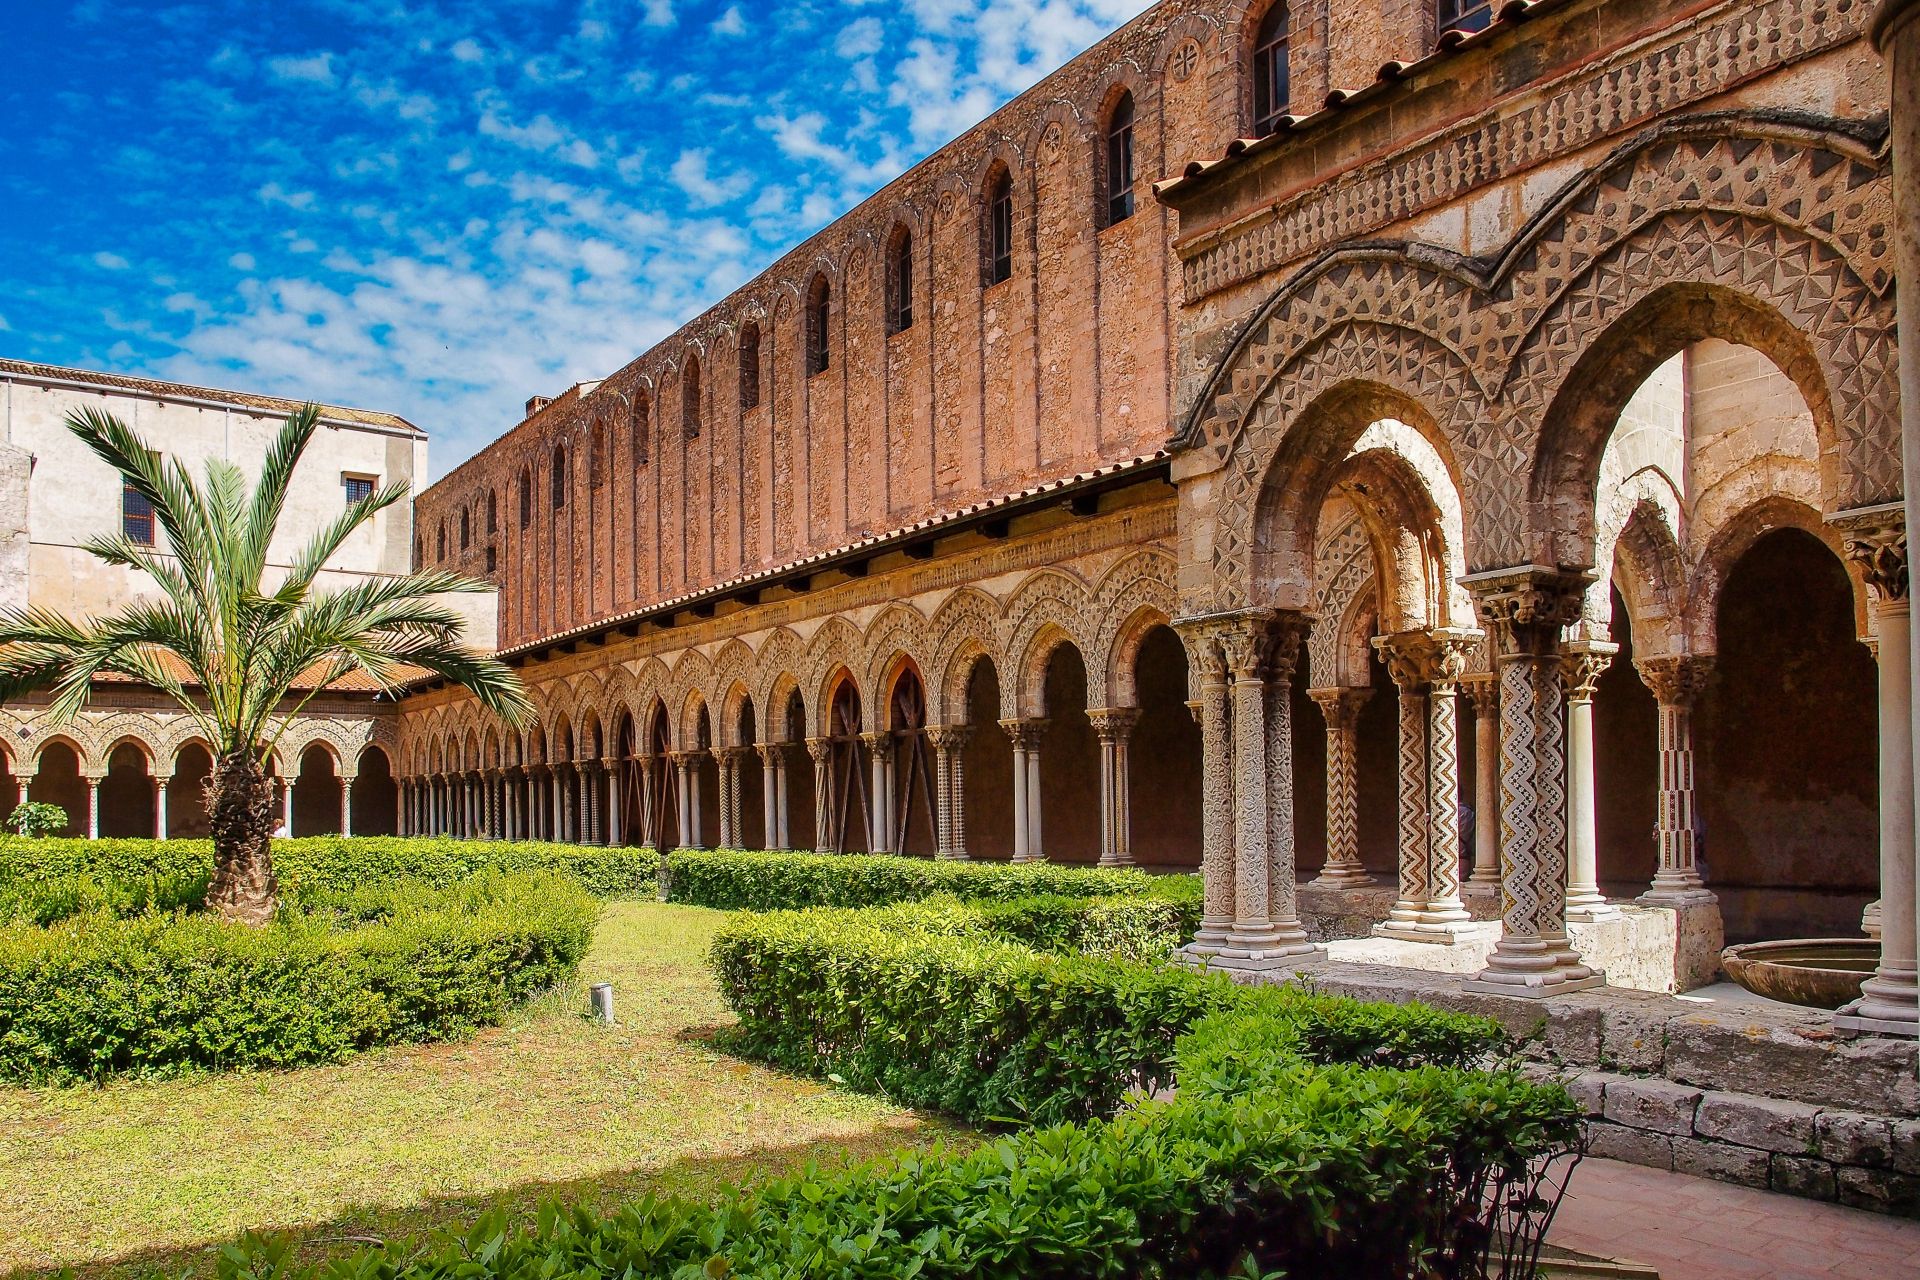 The-courtyard-of-Monreale-cathedral-of-Assumption-Sicily-Italy